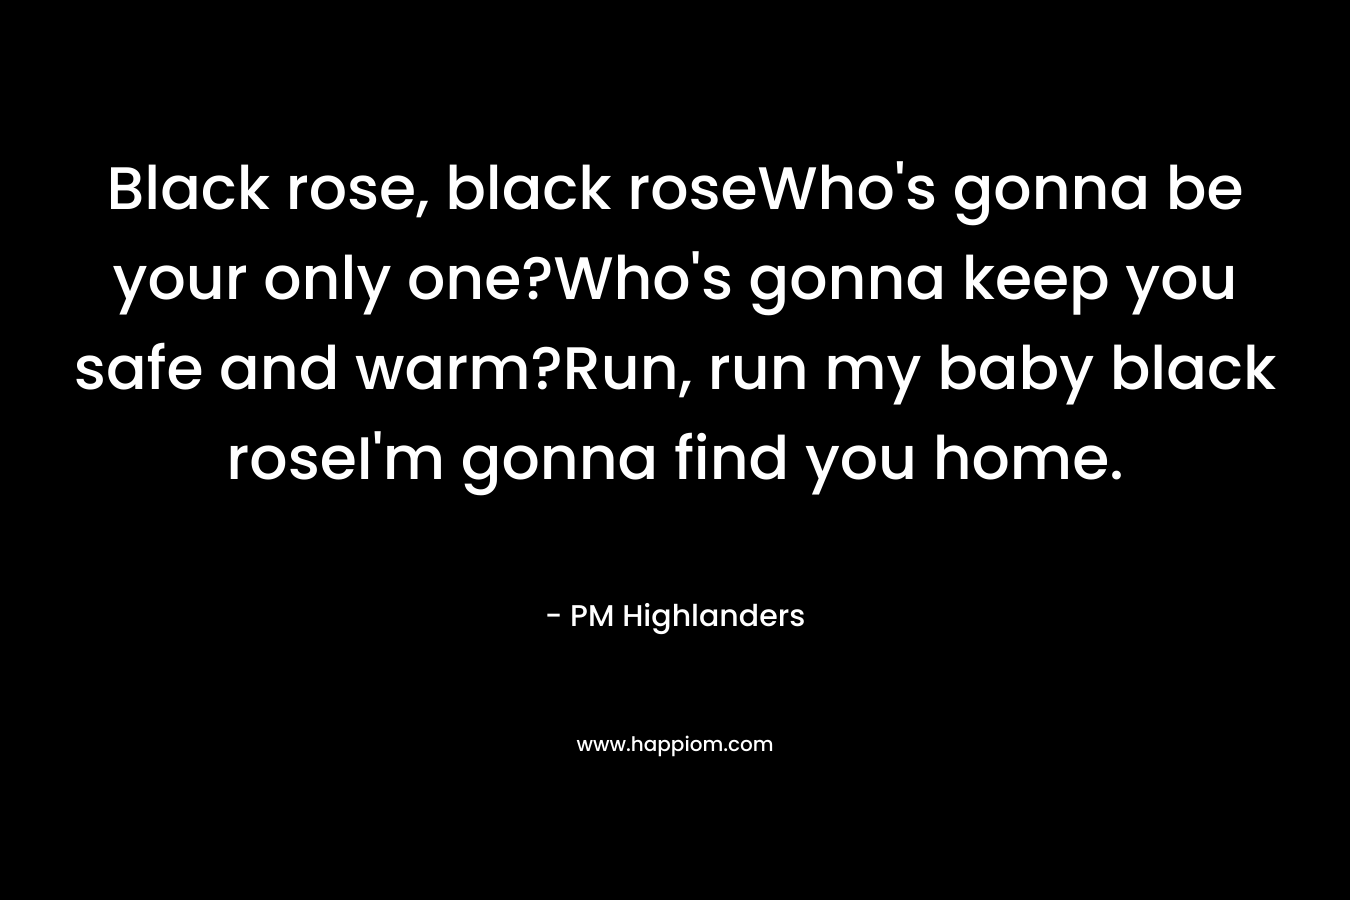 Black rose, black roseWho's gonna be your only one?Who's gonna keep you safe and warm?Run, run my baby black roseI'm gonna find you home.